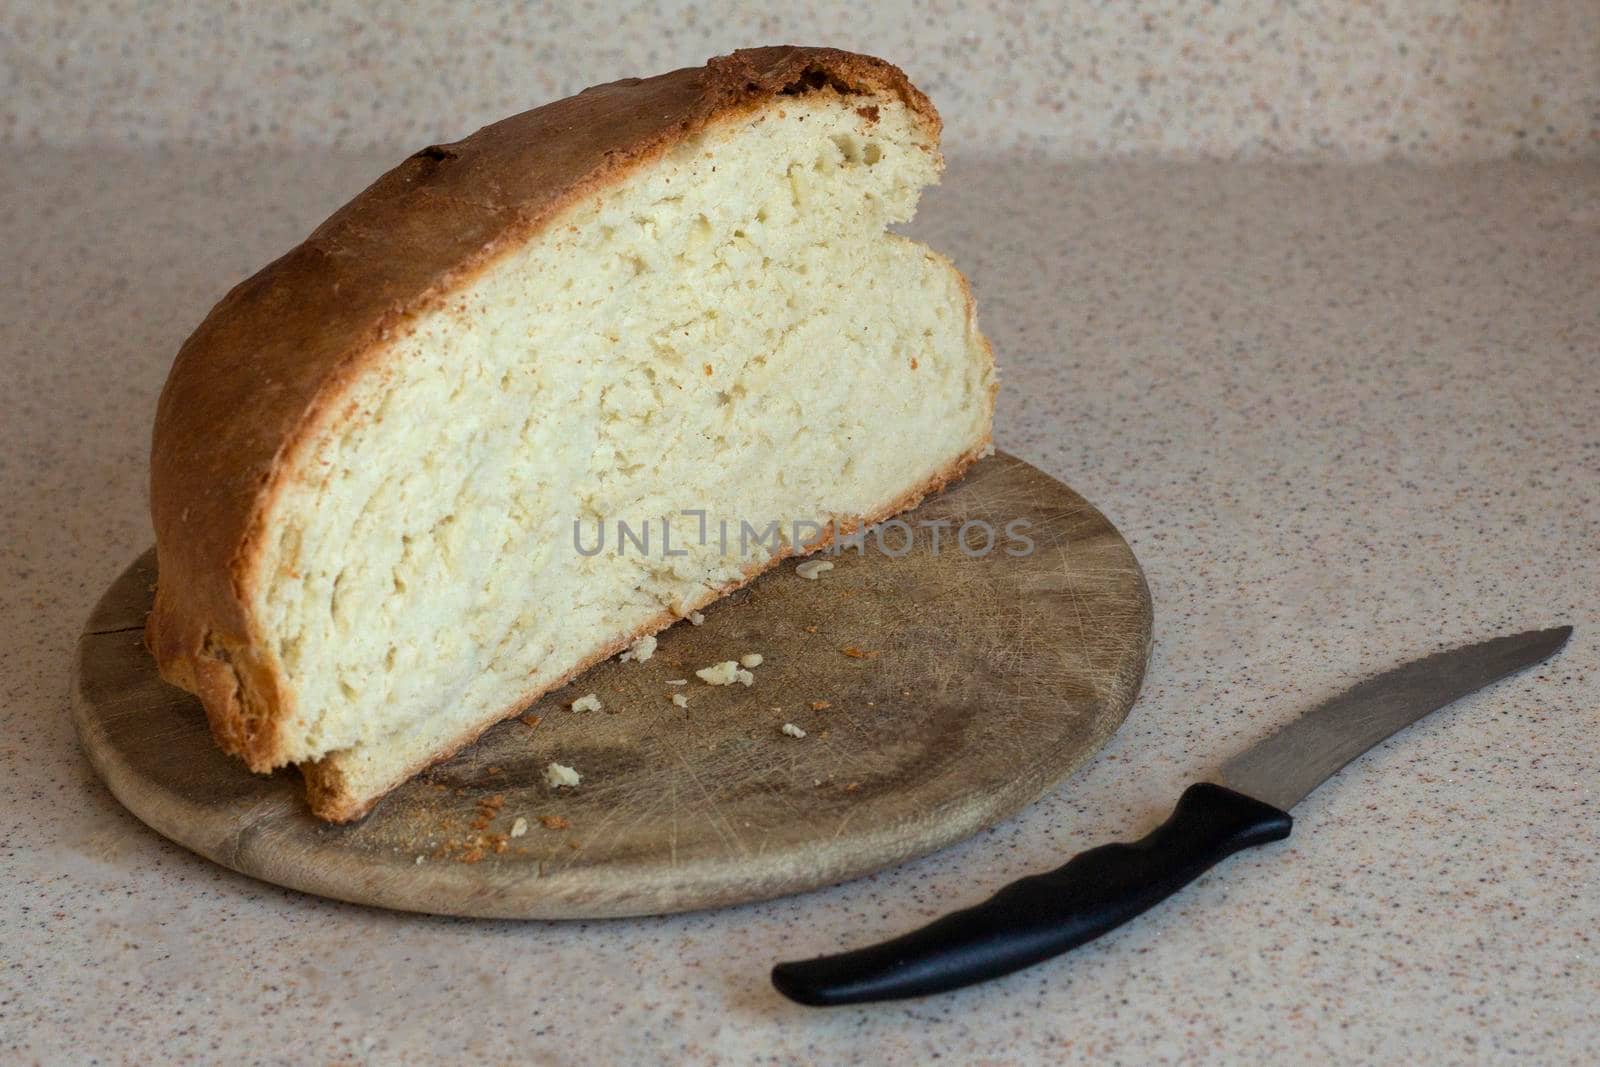 home made fresh bread with crispy crust. it is a half of a loaf is on a kitchen board. there is a knife behind it